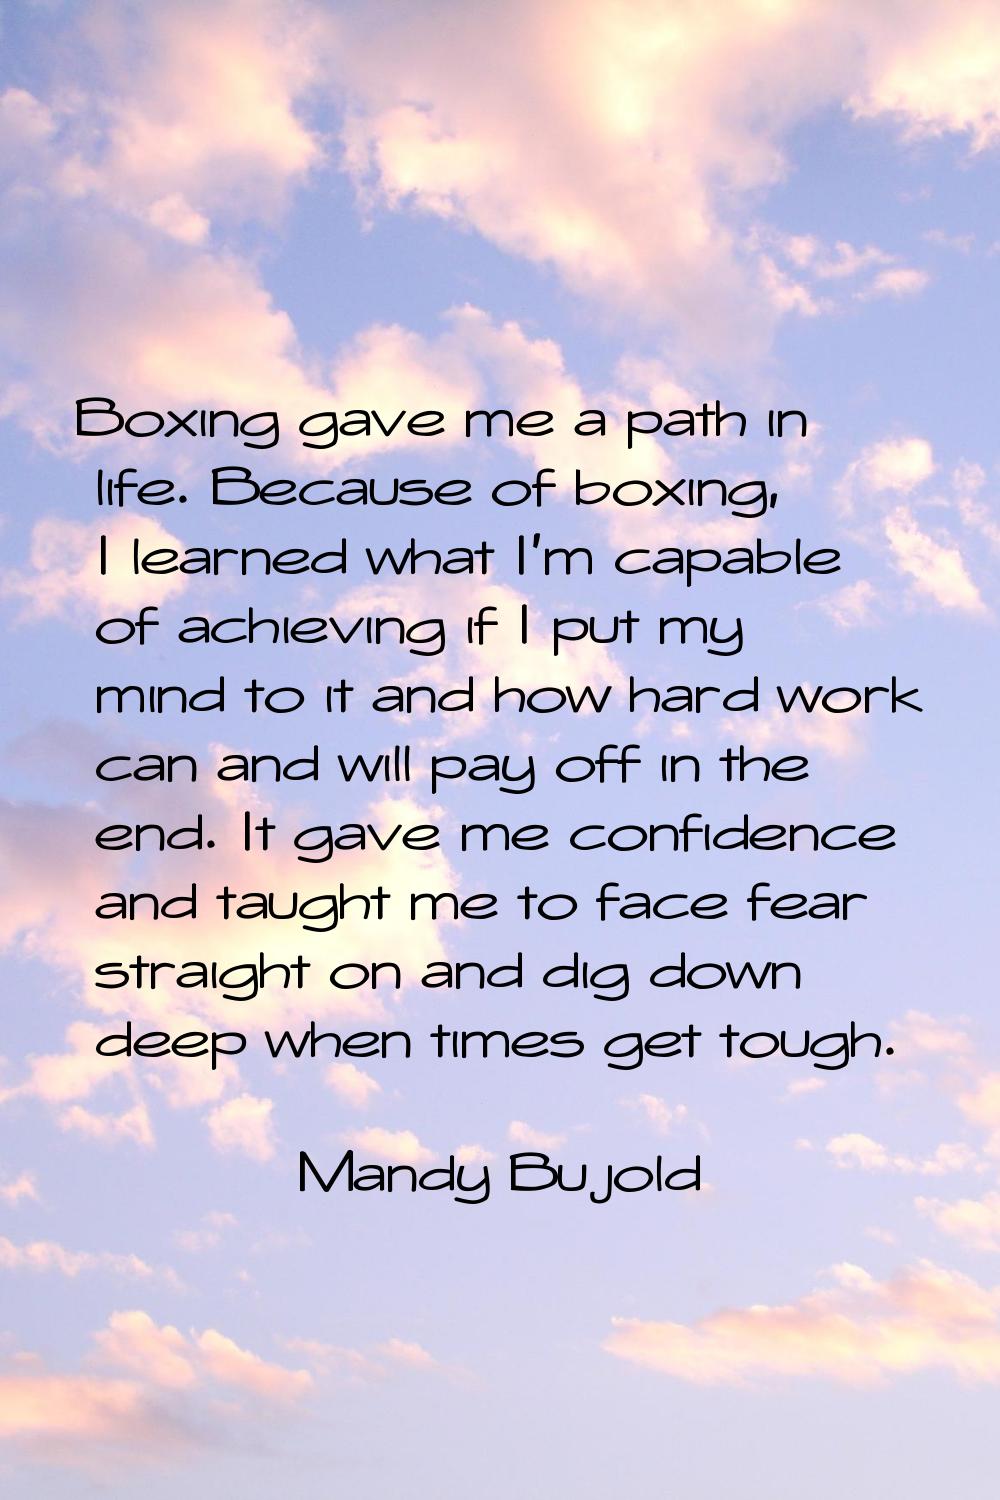 Boxing gave me a path in life. Because of boxing, I learned what I'm capable of achieving if I put 